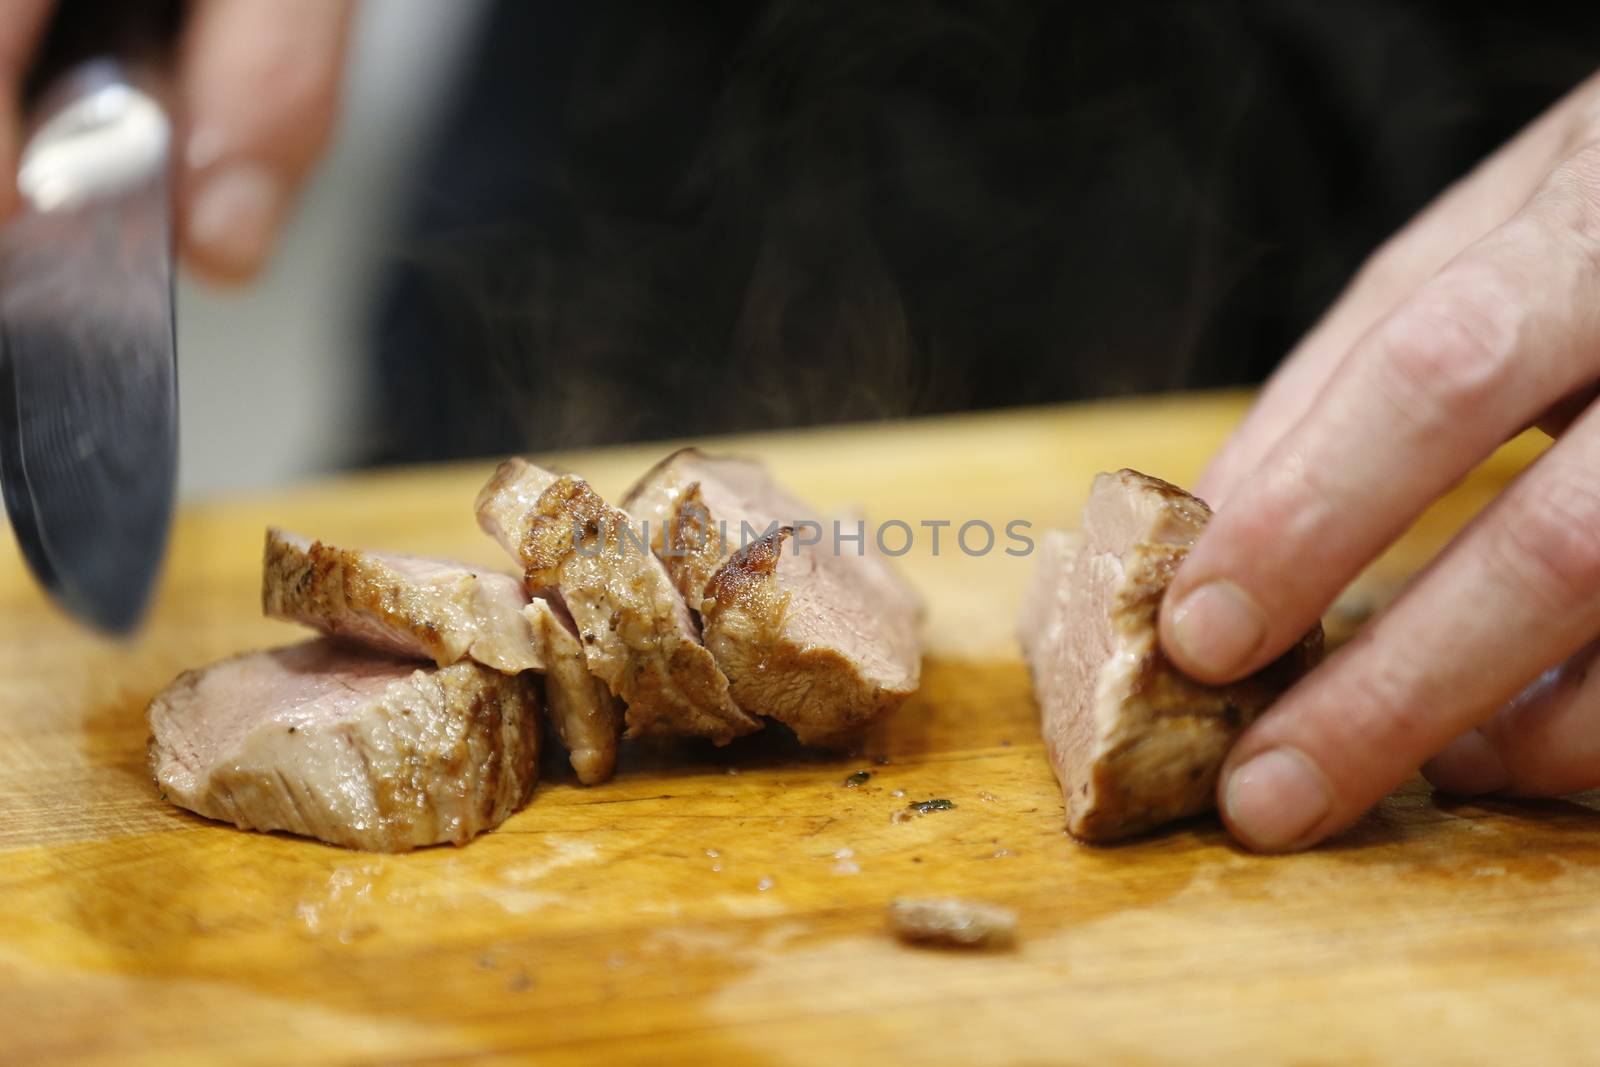 RoastedKnife cuts cooked hot meat.Cut the fried meat. Ready meat. Ready-made hot meat. Meat with smoke meat on a baking pan.